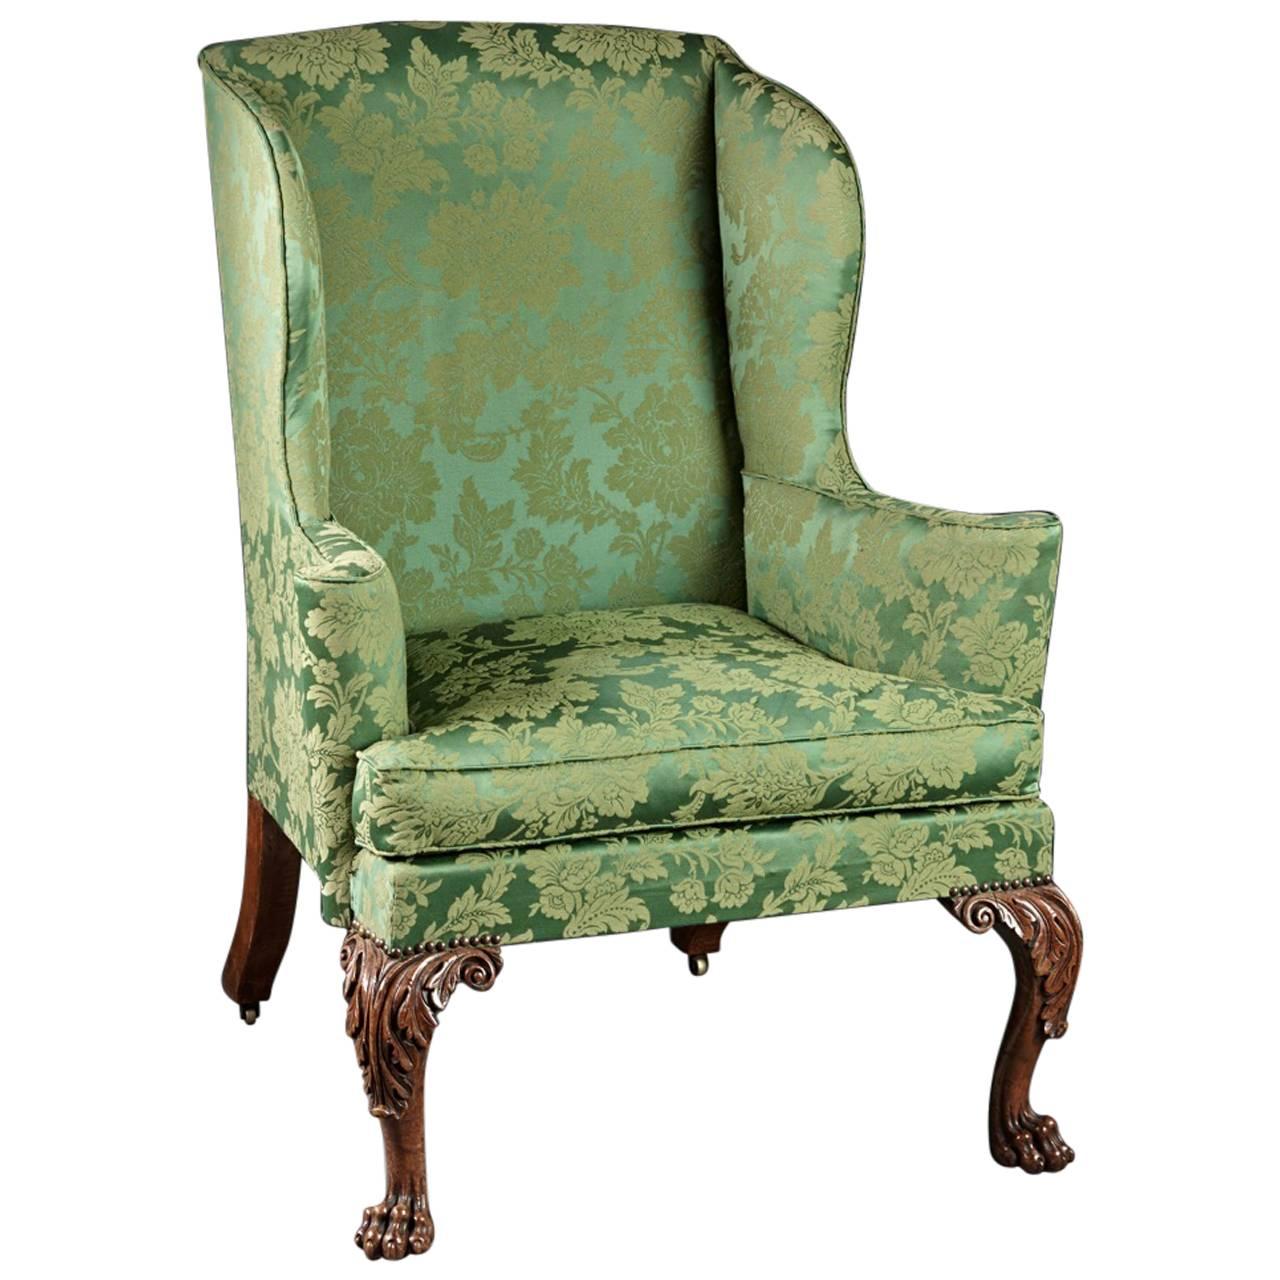 Finely Carved and Upholstered Walnut English Georgian 18th Century Wing Chair